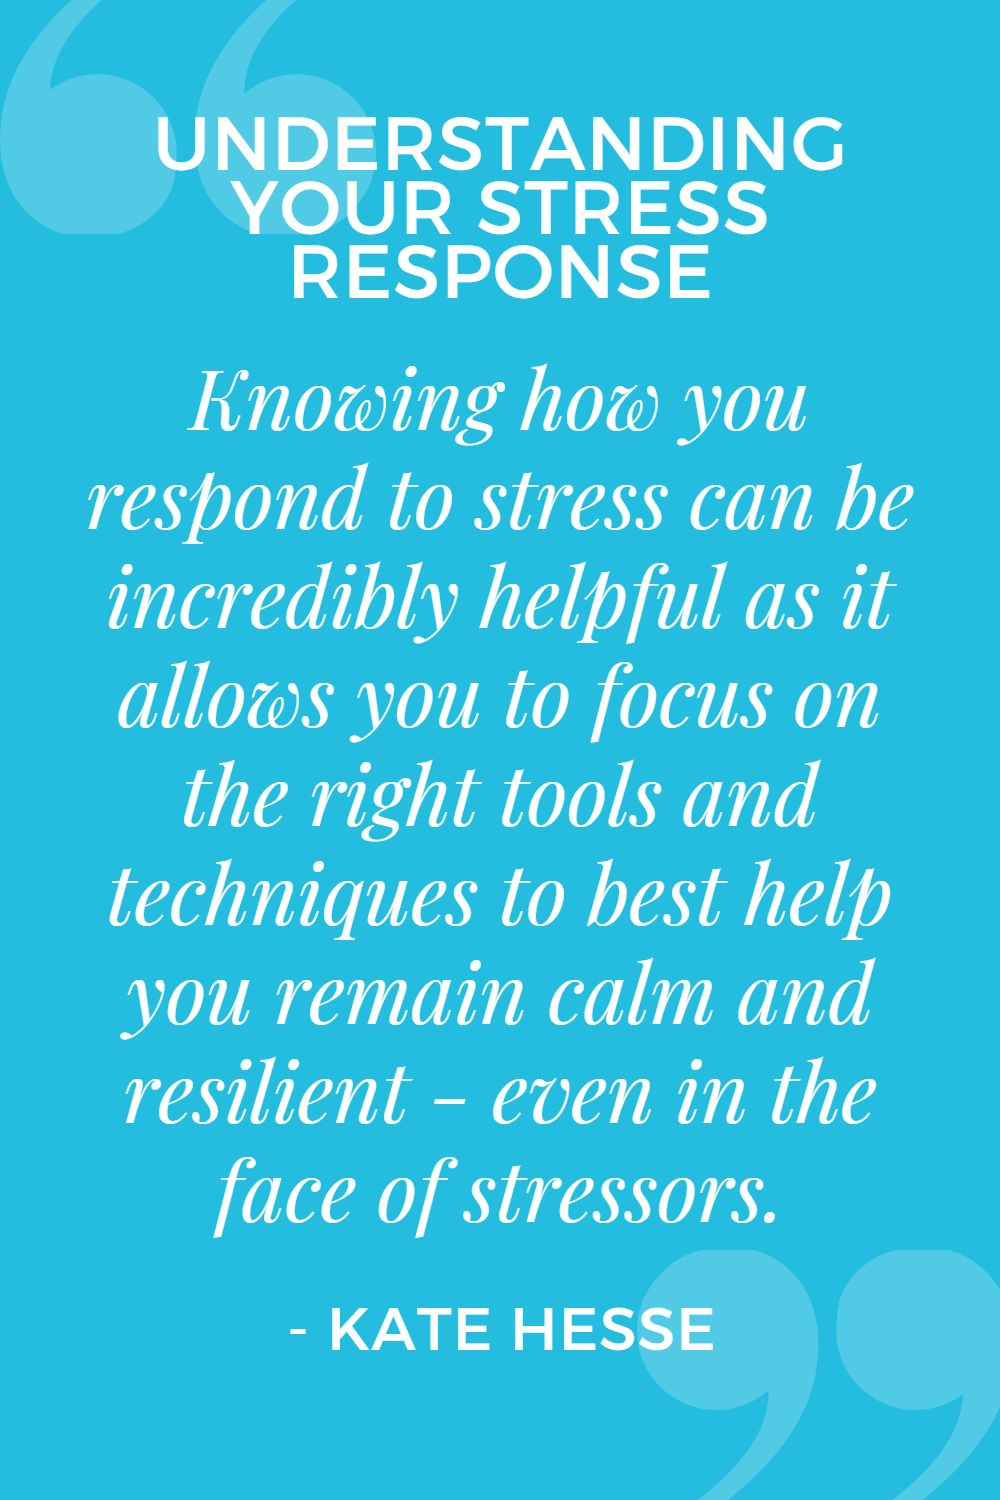 Knowing how you respond to stress can be incredibly helpful as it allows you to focus on the right tools and techniques to best help you remain calm and resilient - even in the face of stressors.